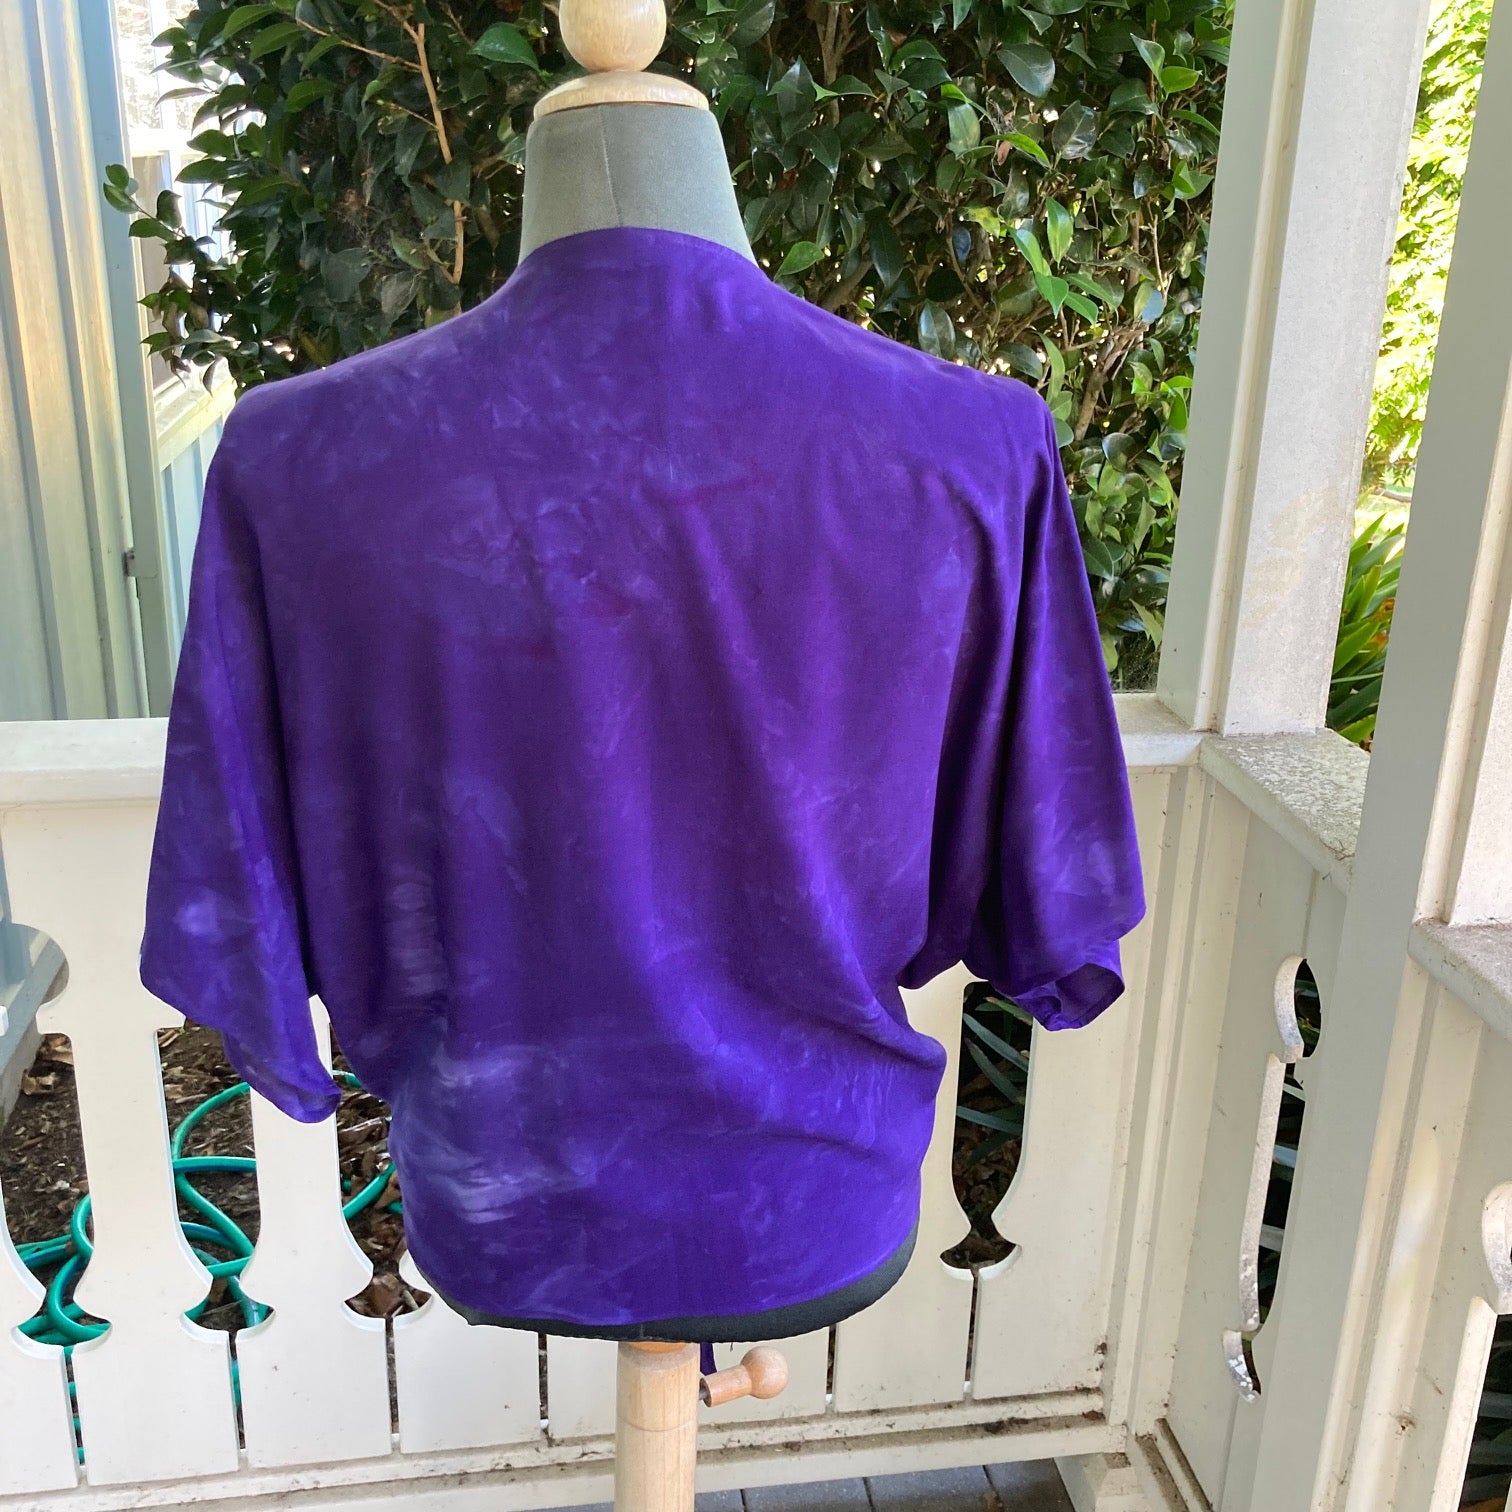 Ohe Kapala TIE Blouse in Deep Vivid Violet with Mauna and 'Iwa